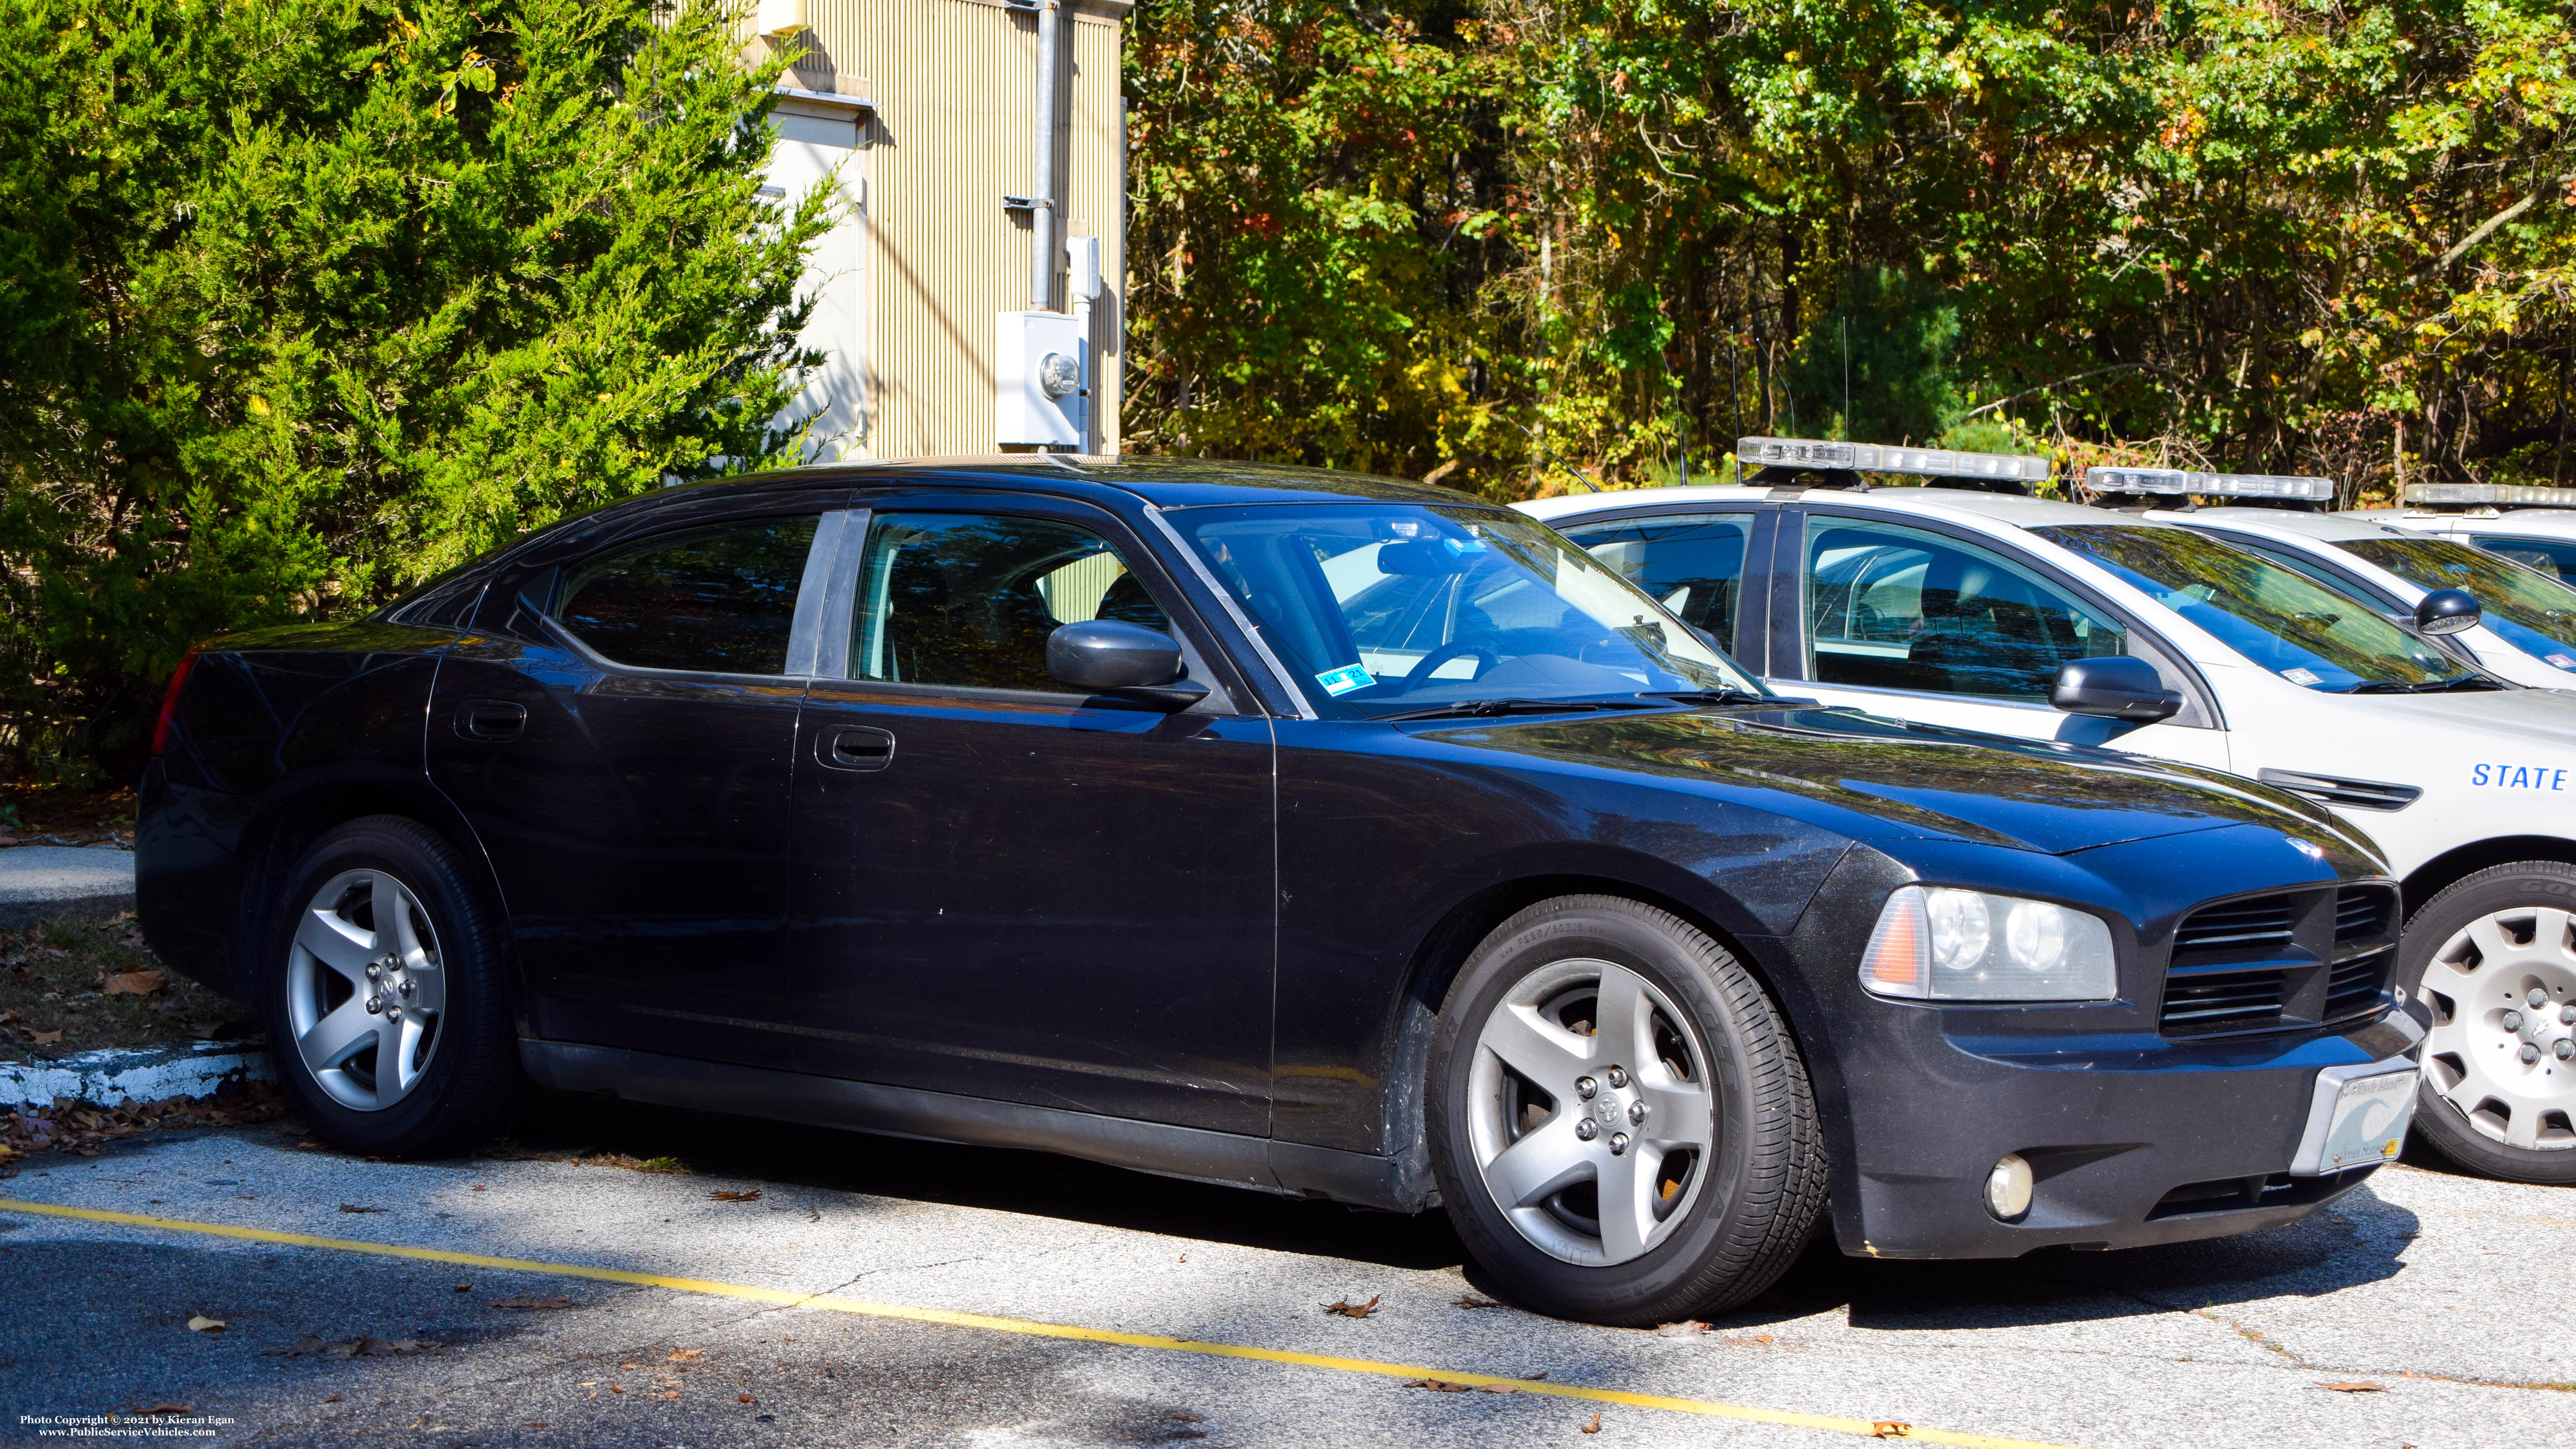 A photo  of Rhode Island State Police
            Unmarked Unit, a 2006-2010 Dodge Charger             taken by Kieran Egan